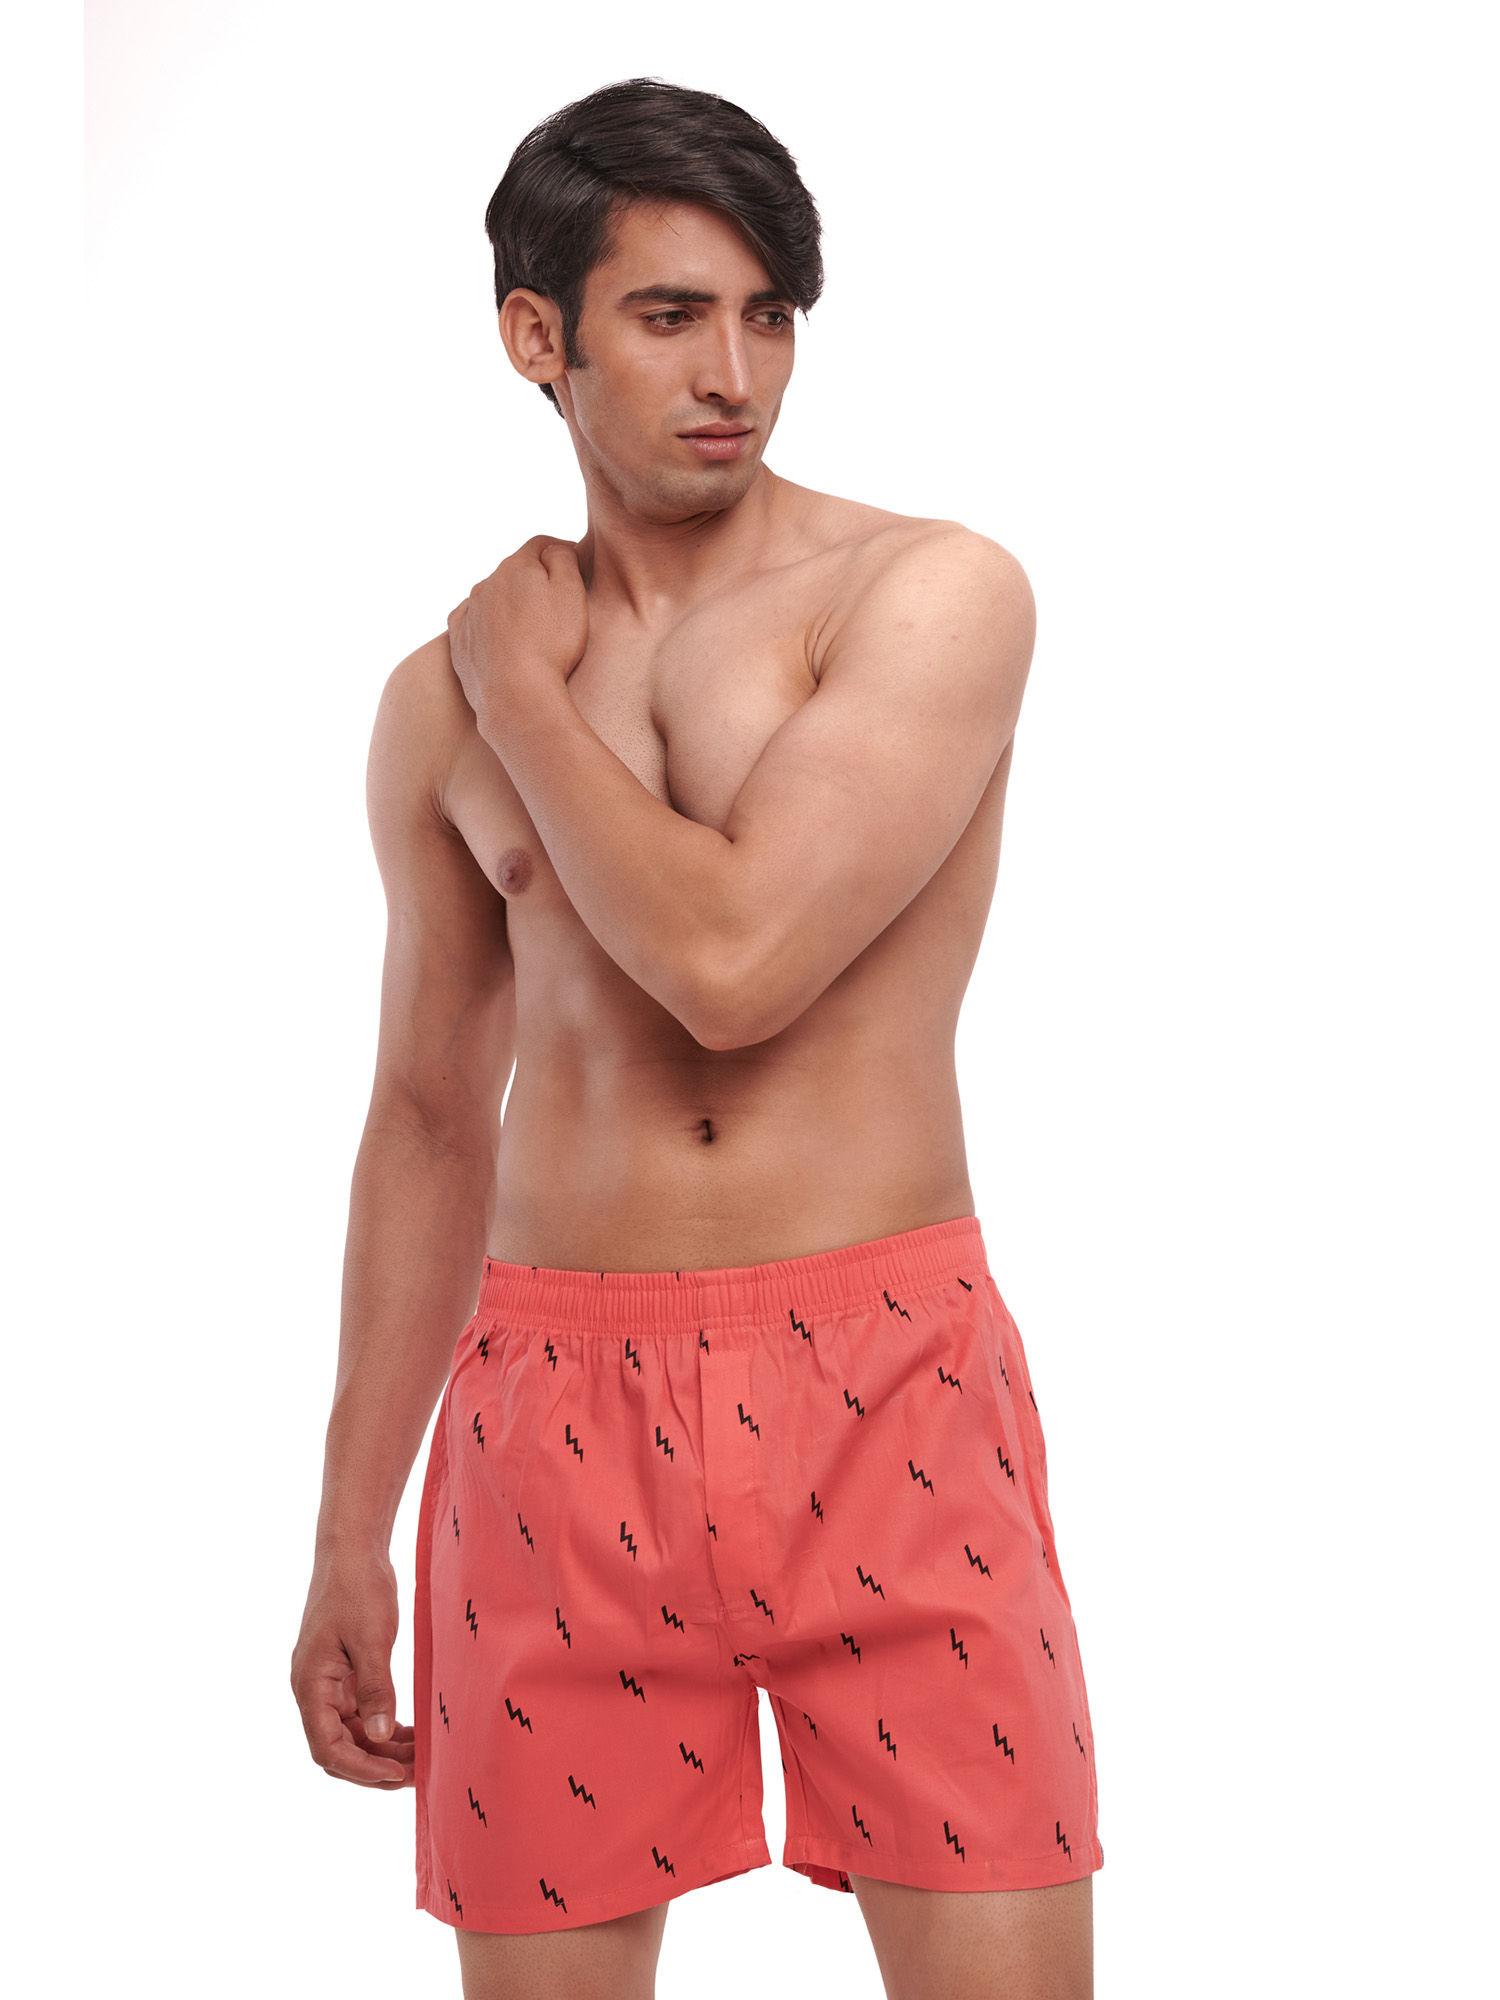 men's-cotton-printed-boxer-shorts-red-red